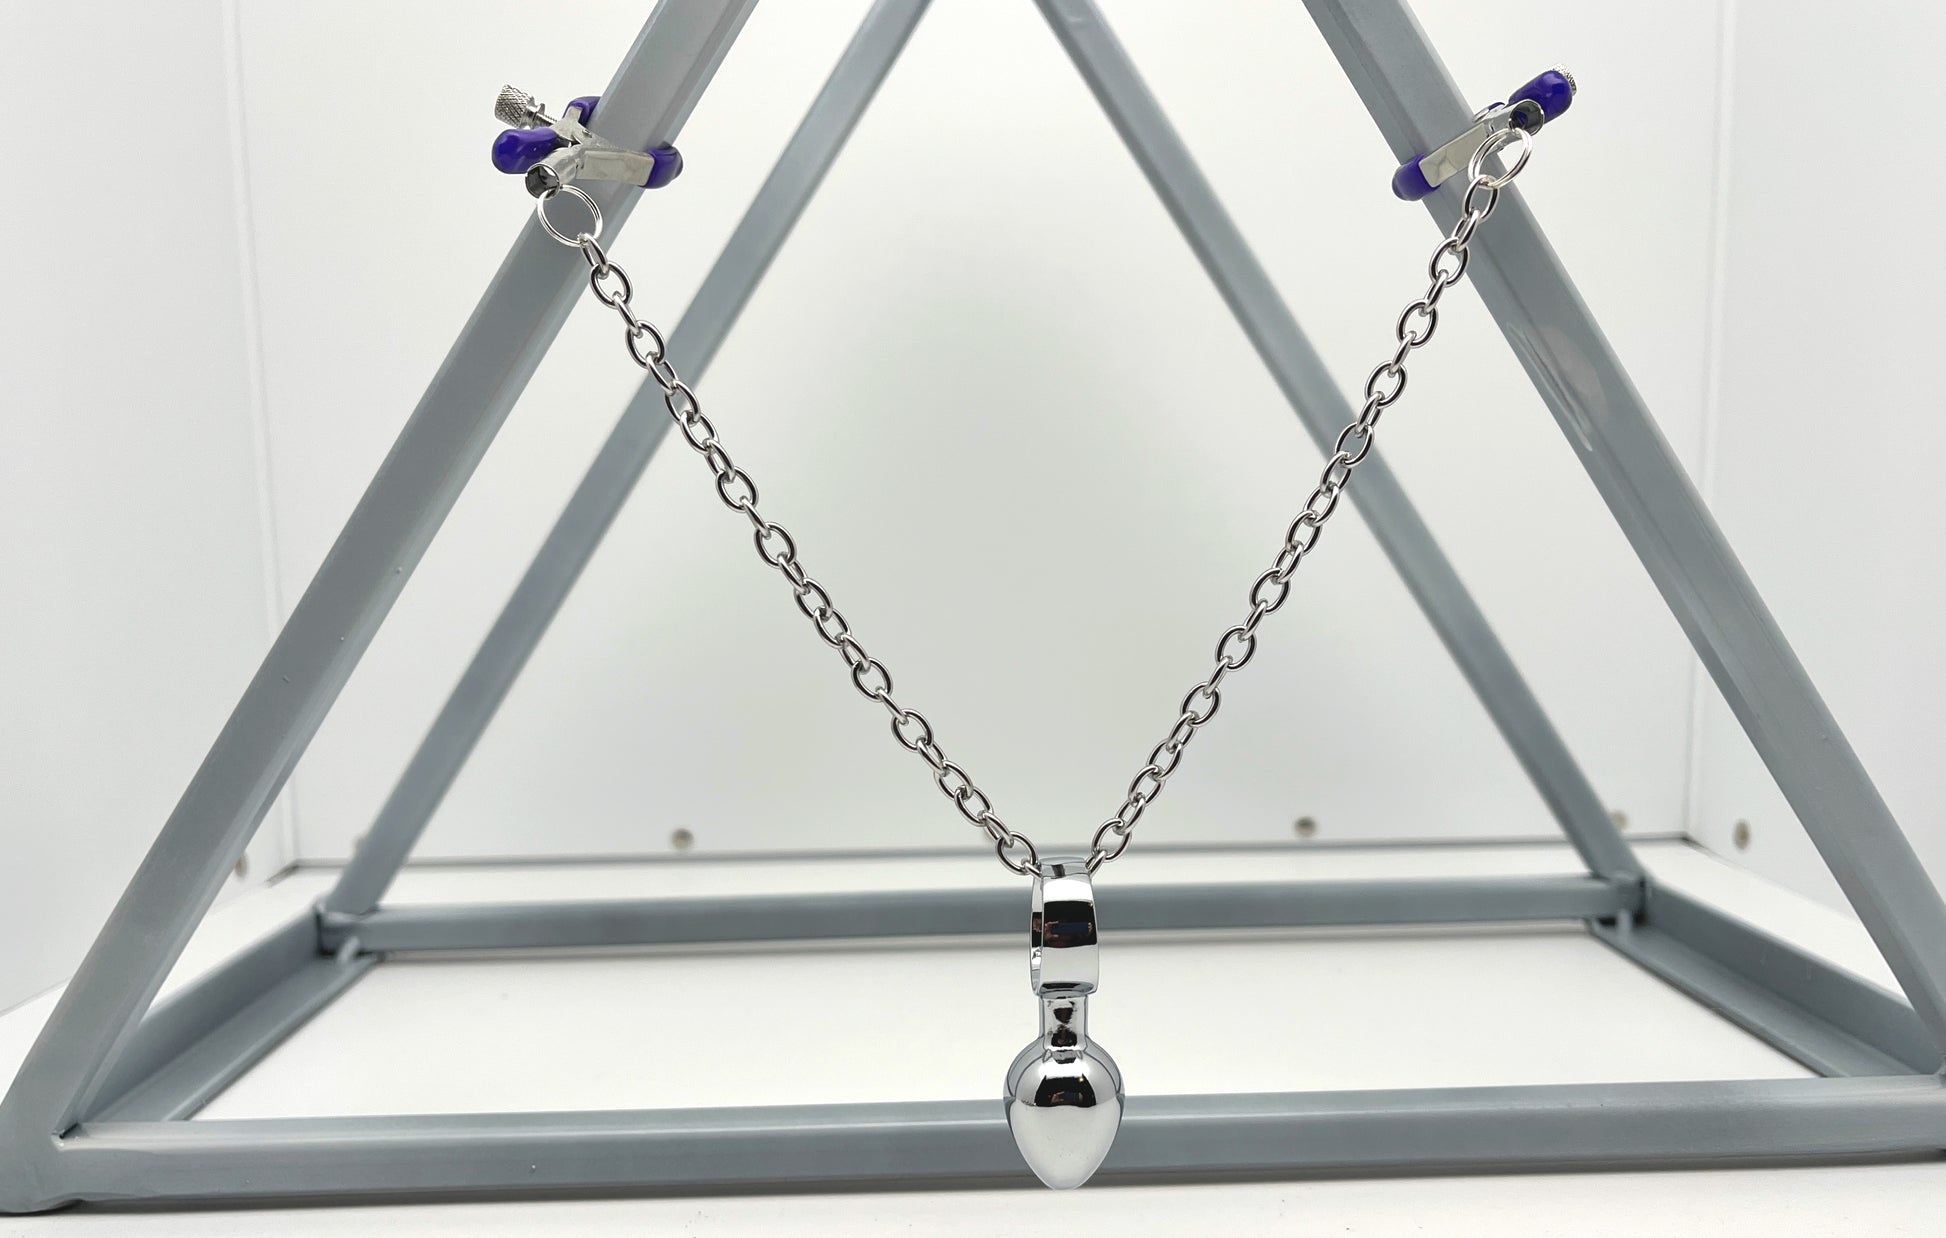 Adjustable Bullnose Nipple Clamps with Chain and Mini Butt Plug